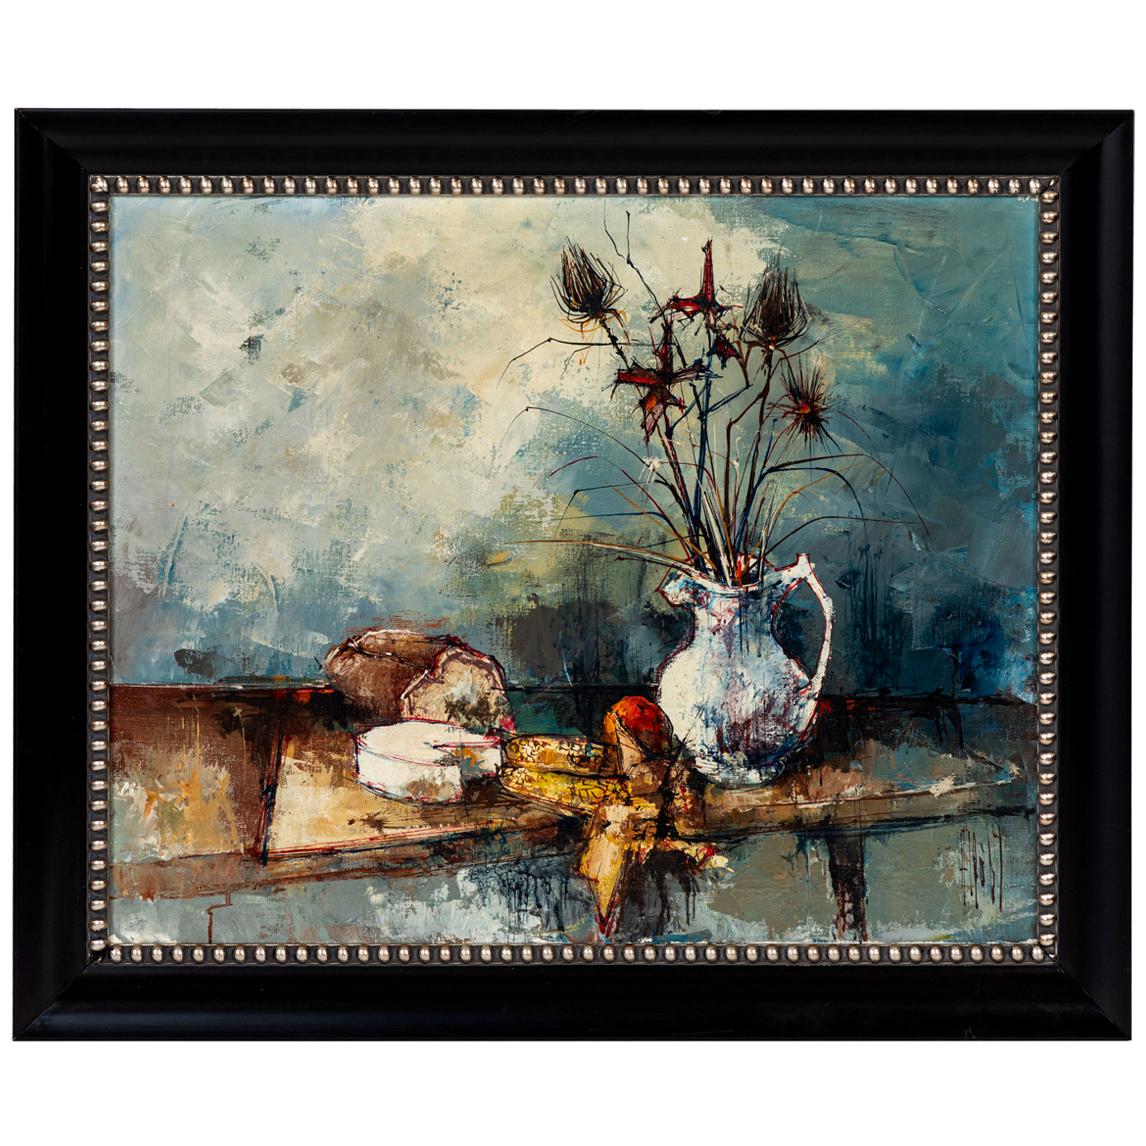 Vintage Oil Painting of Still Life, Signed by Artist, Aldo, 1964